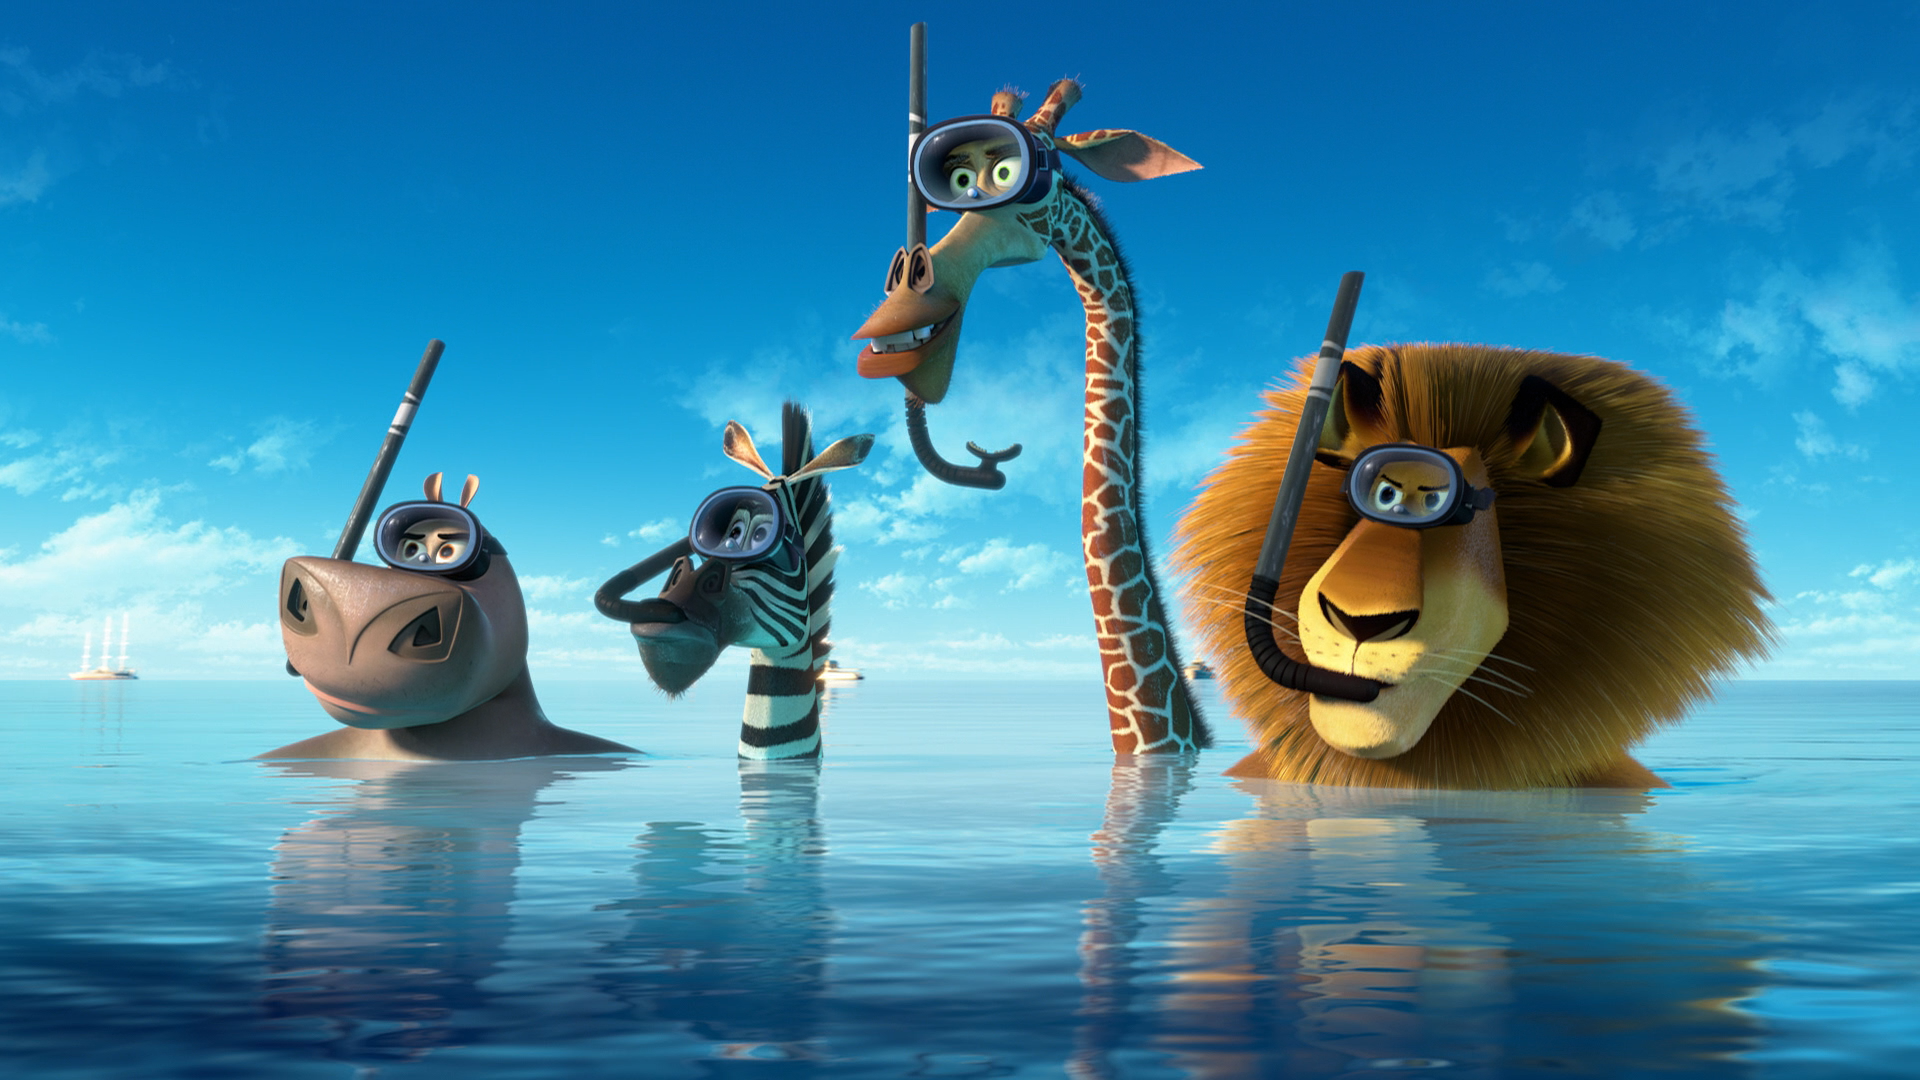 Download 1920x1080 Madagascar 3 Blue Ray 3D Wallpaper